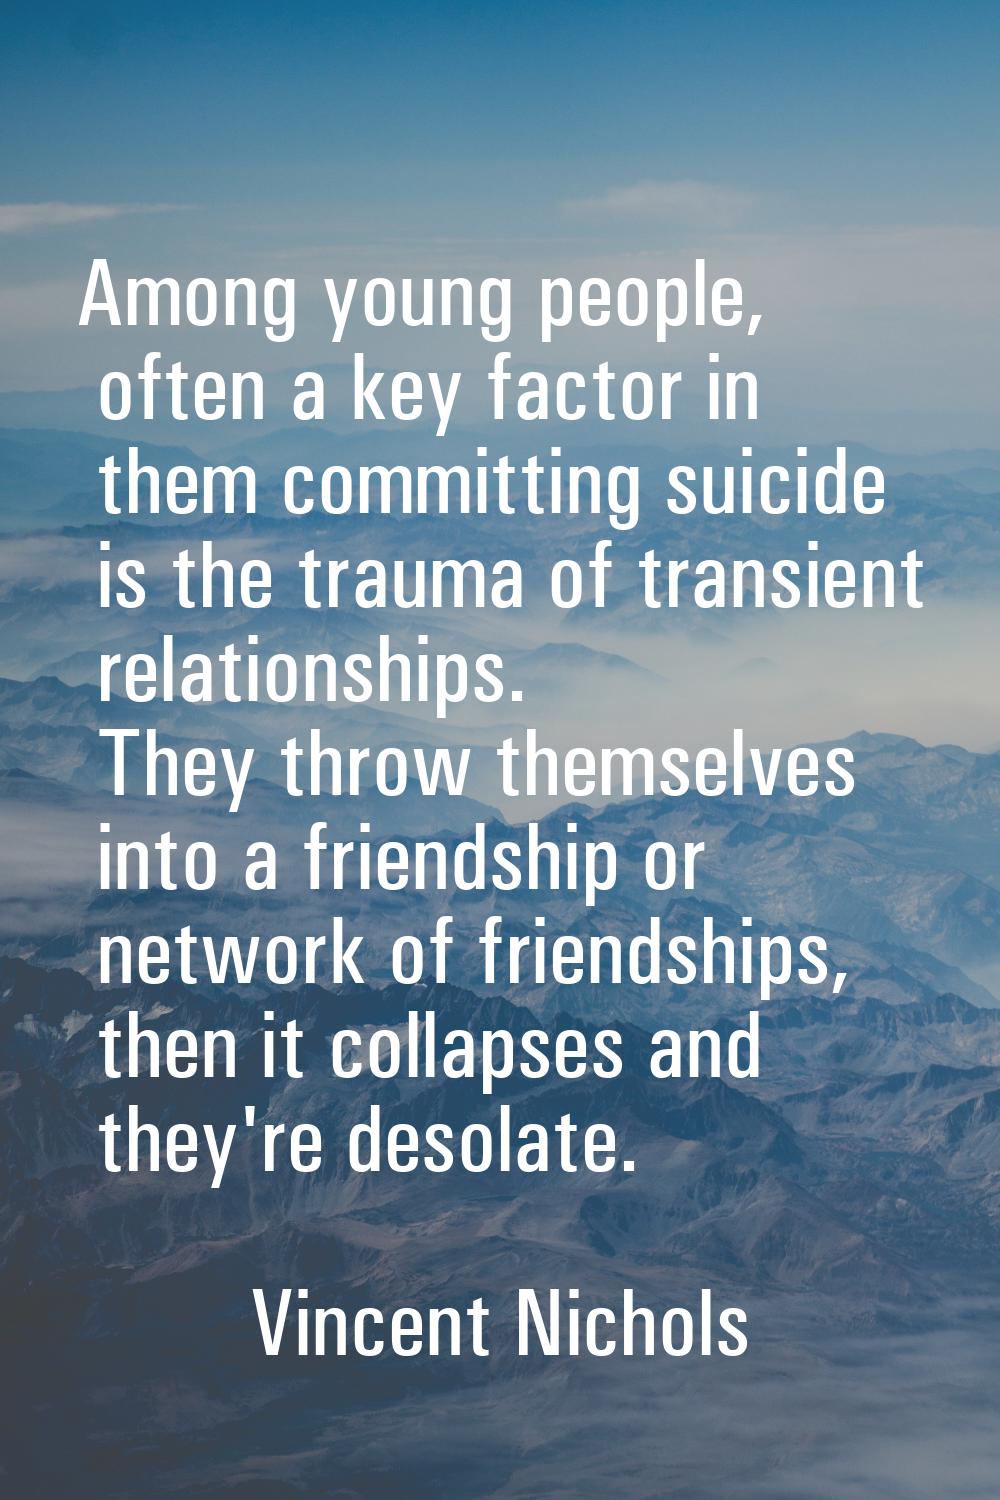 Among young people, often a key factor in them committing suicide is the trauma of transient relati